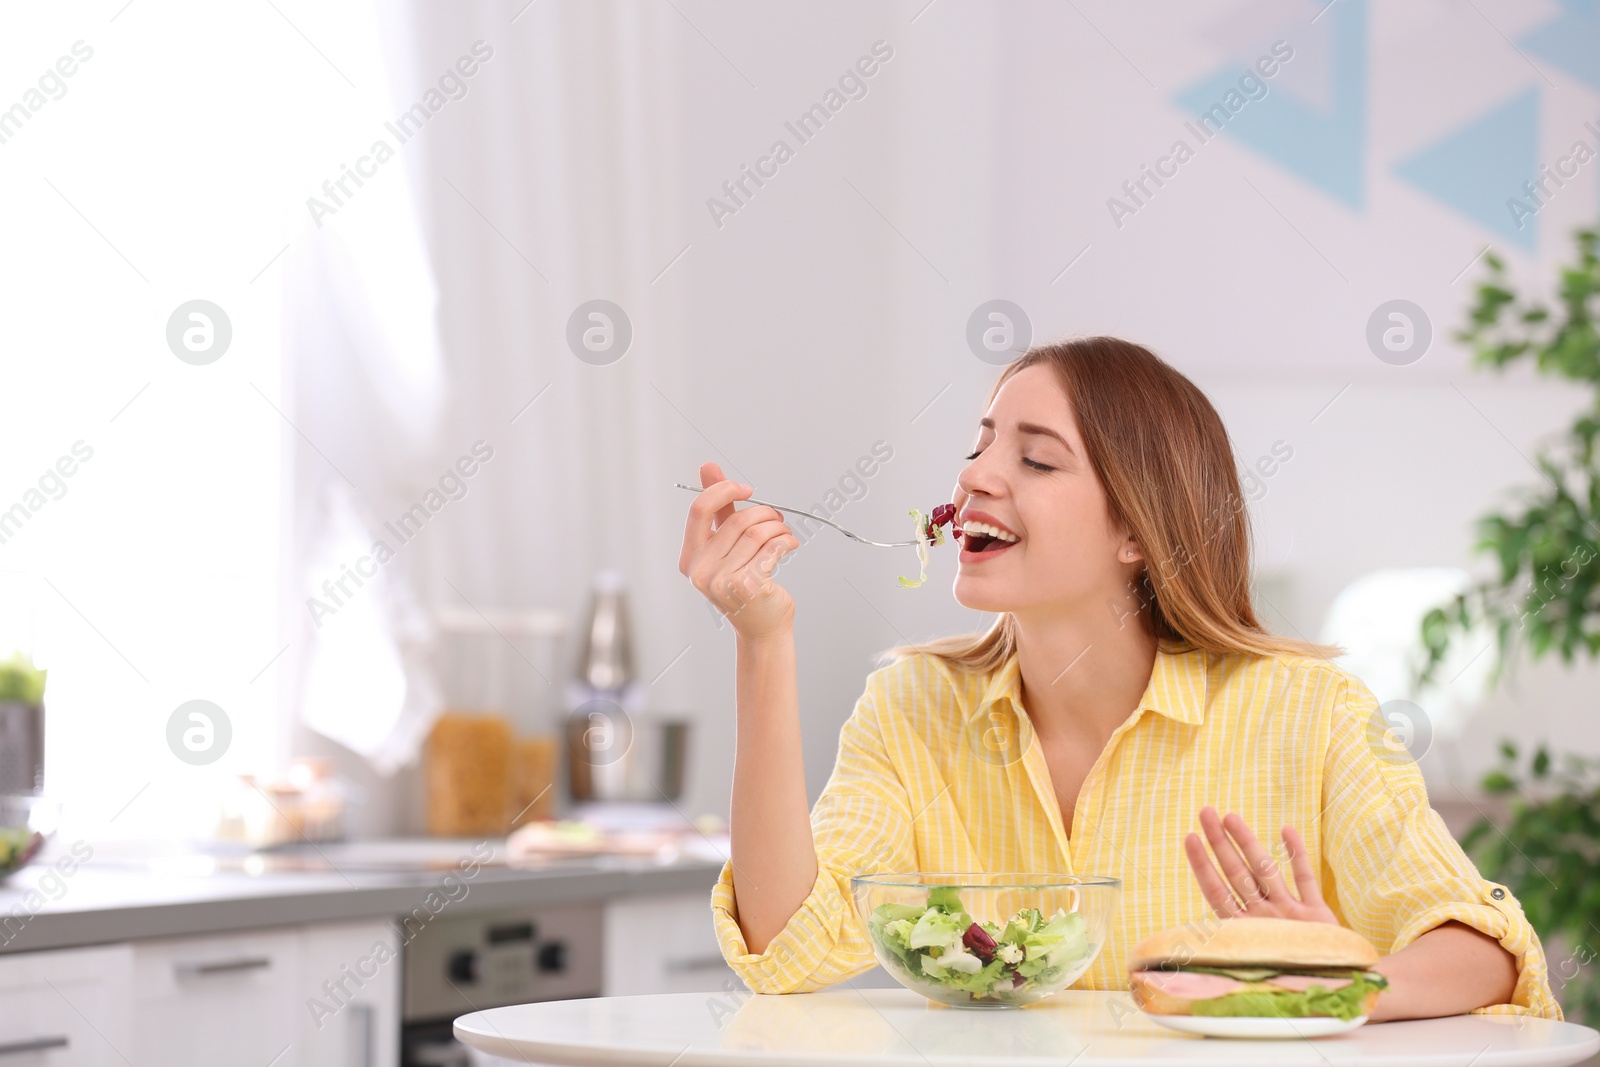 Photo of Happy young woman eating salad instead of sandwich in kitchen, space for text. Healthy diet